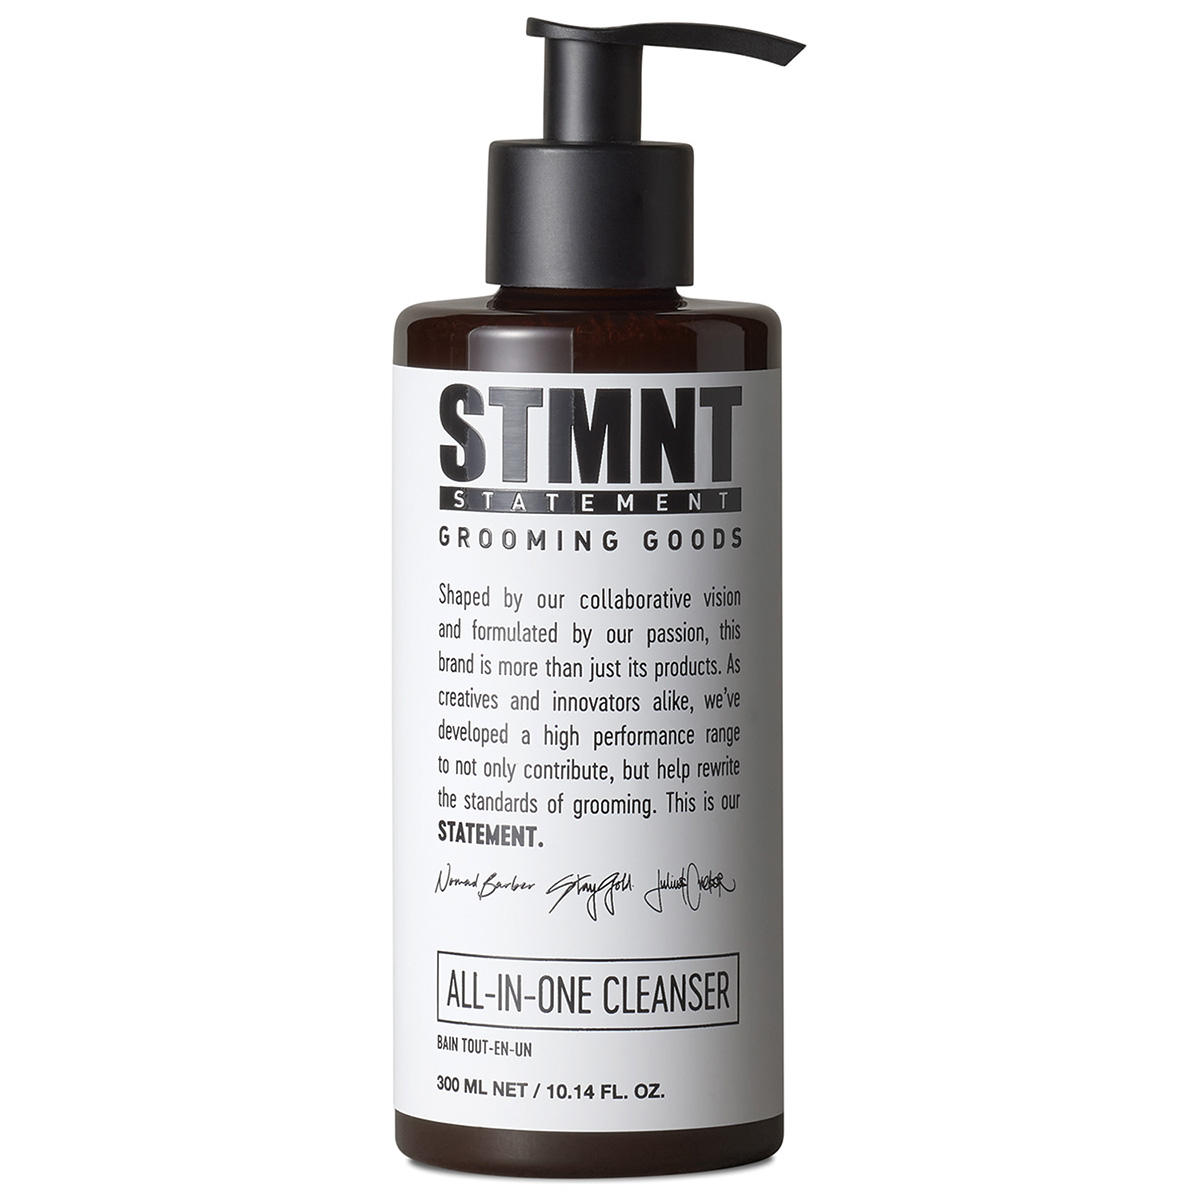 STMNT All-In-One Cleanser 300 ml